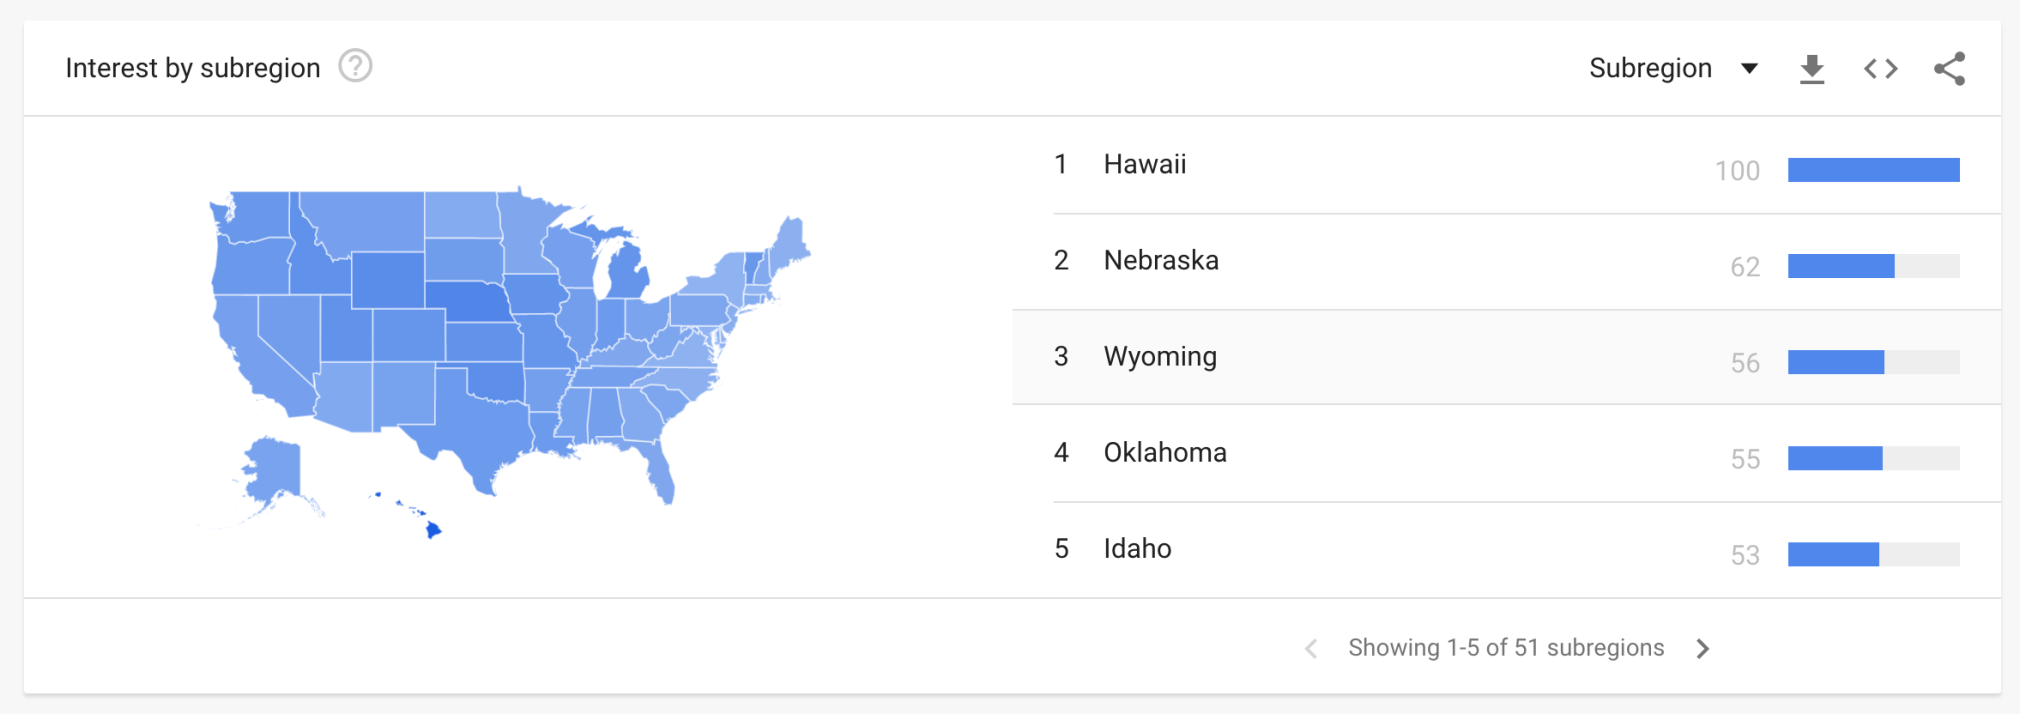 Google Trends research by region